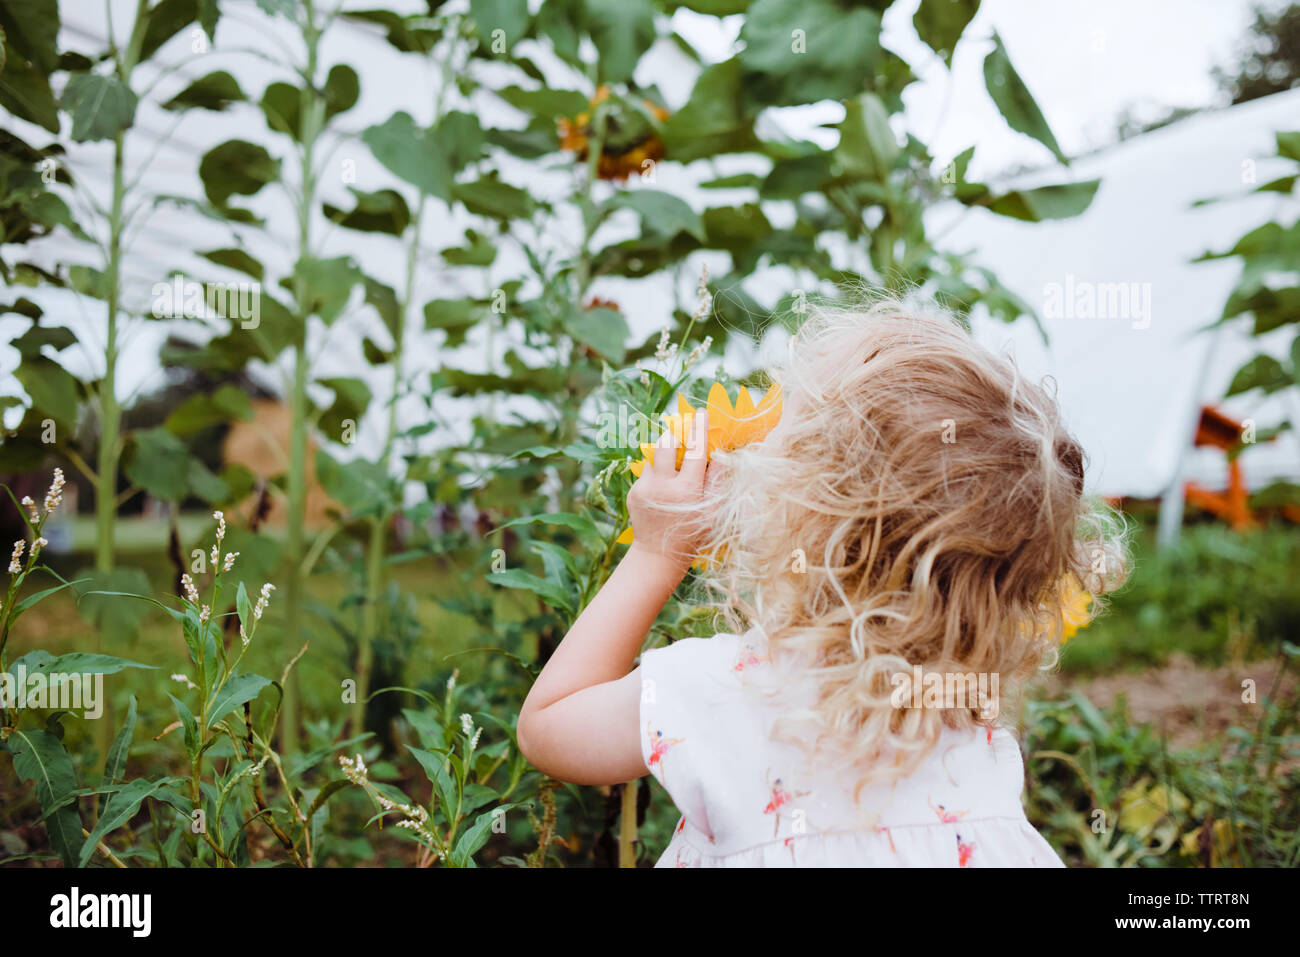 Rear view of girl smelling sunflower at field Stock Photo